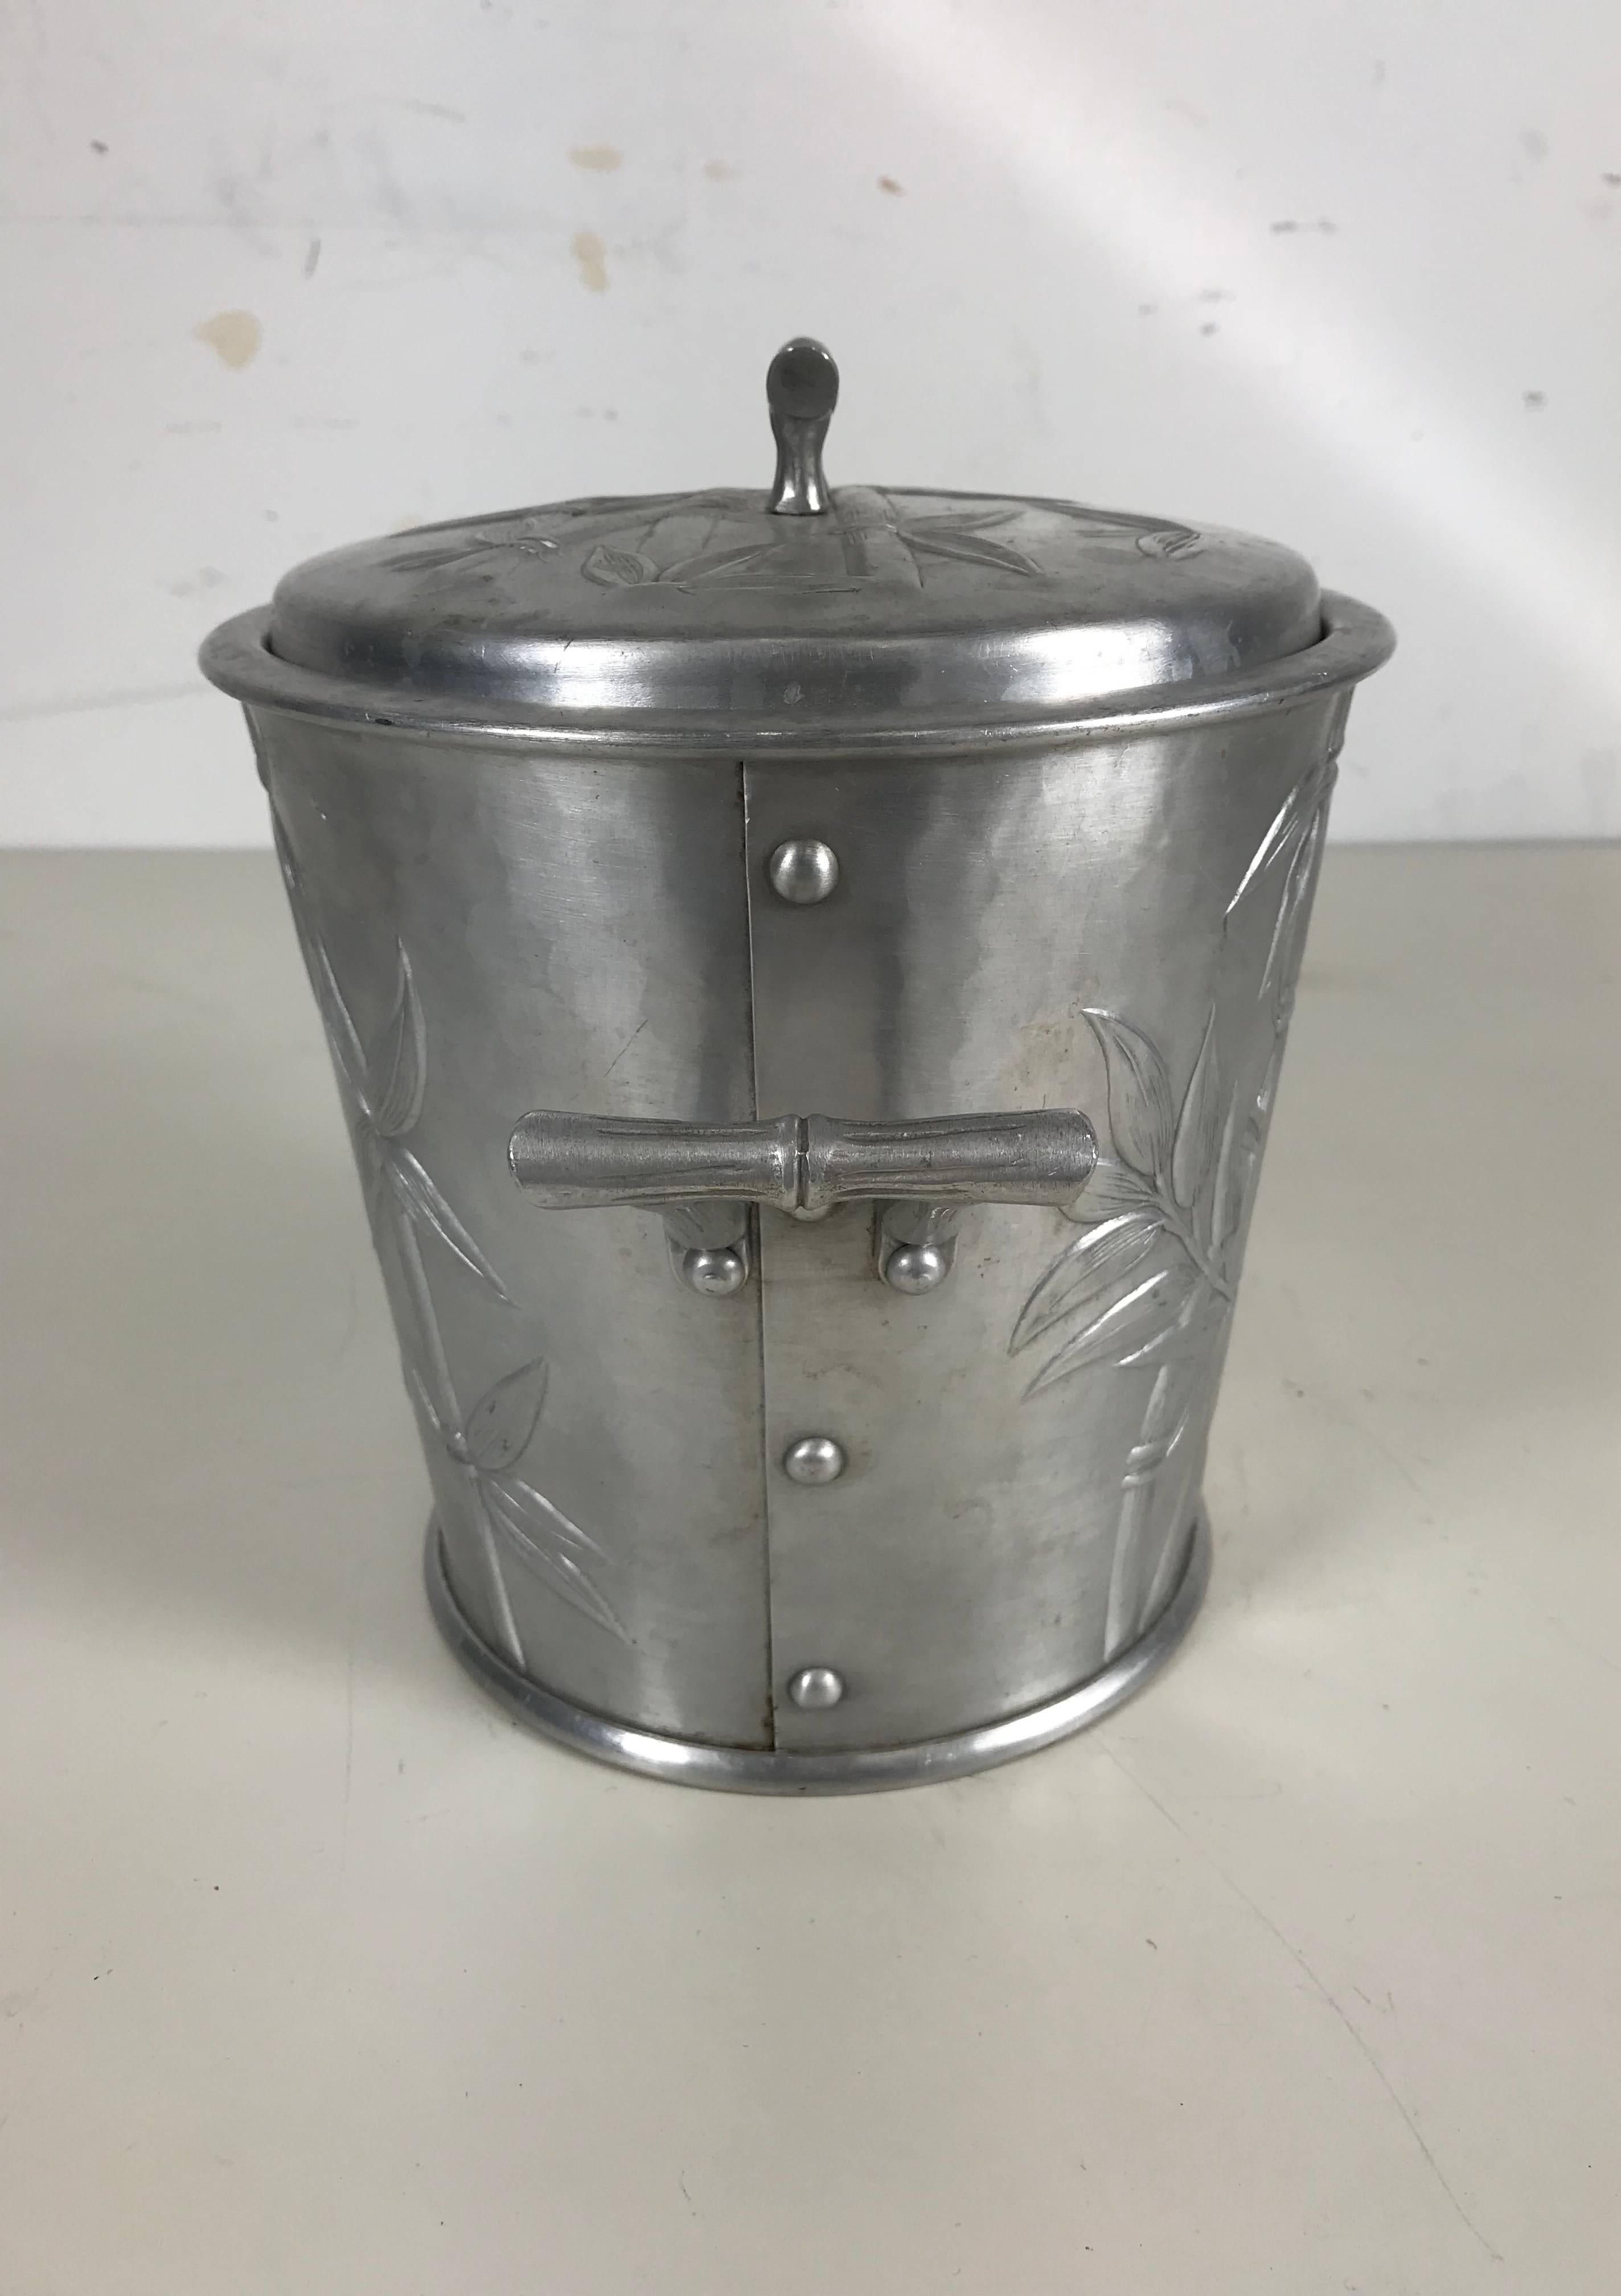 Mid-Century Modern ice bucket with Bamboo motif by Everlast, forged aluminum.